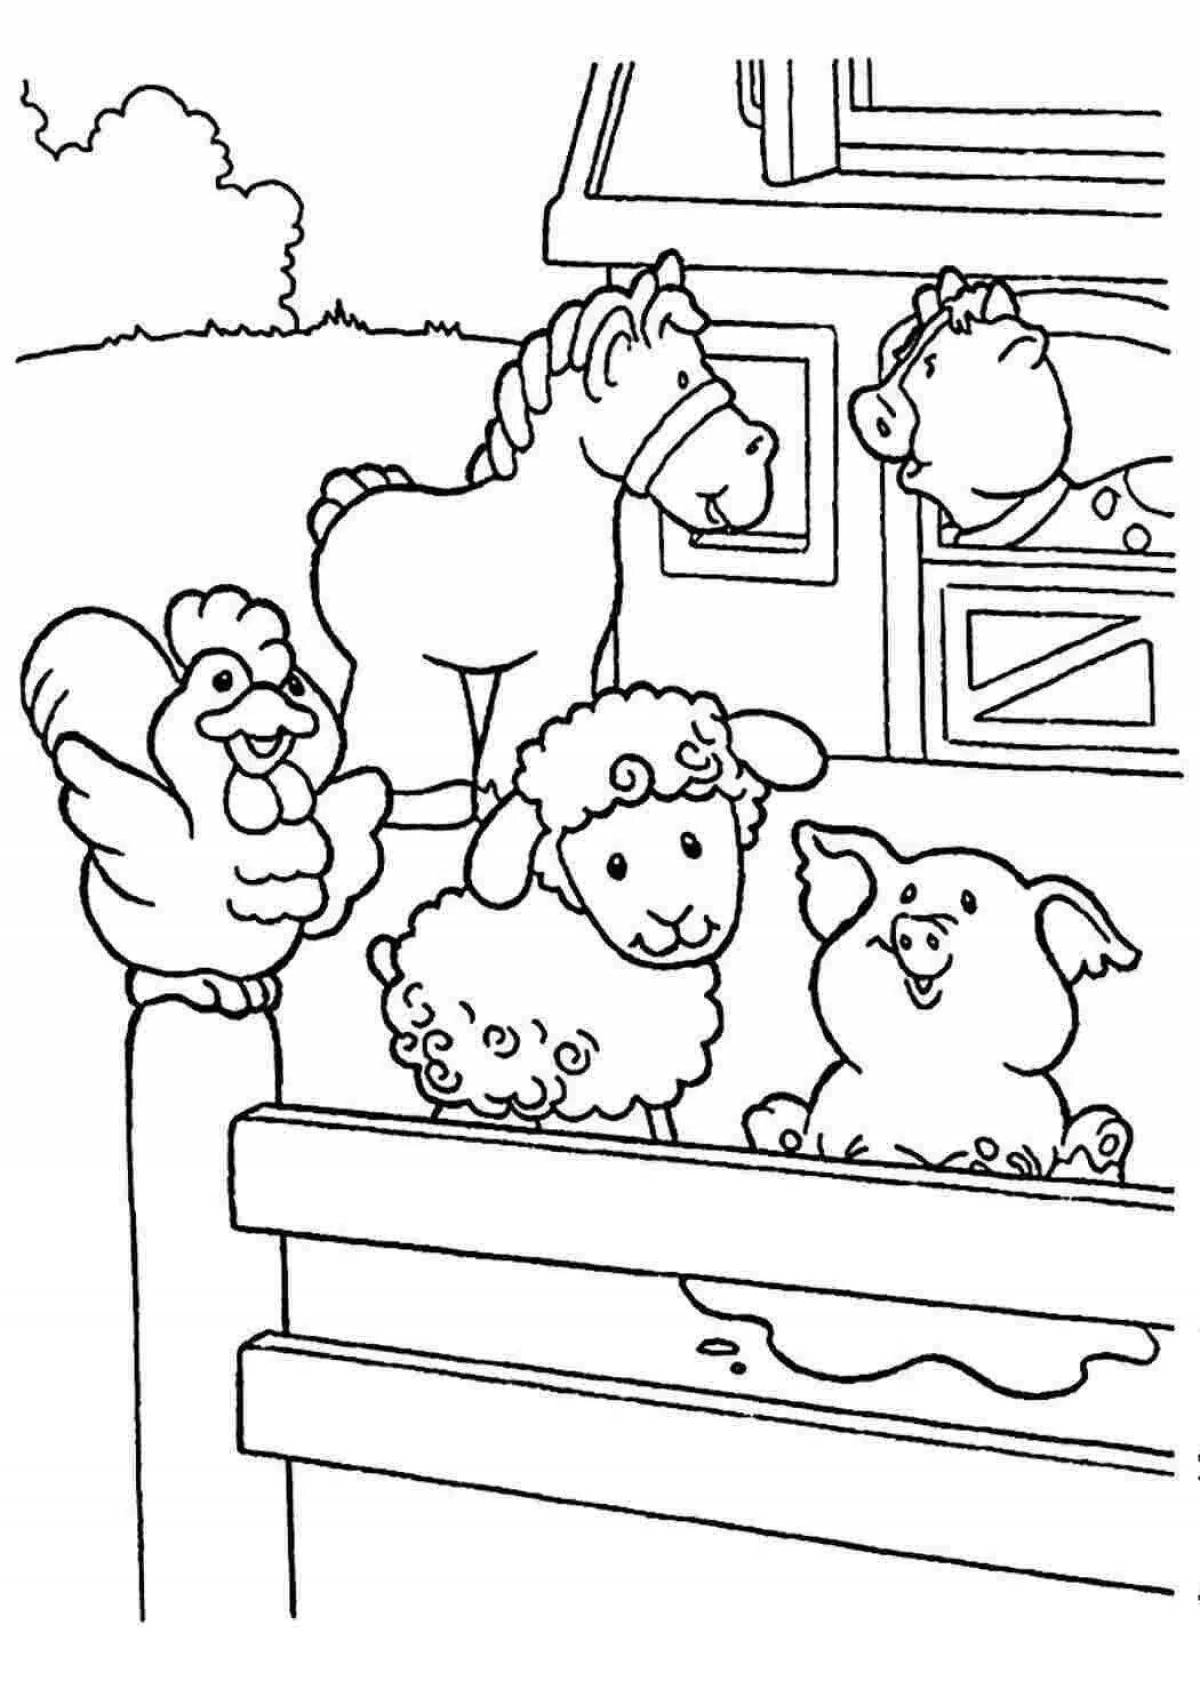 Living farm coloring book for kids